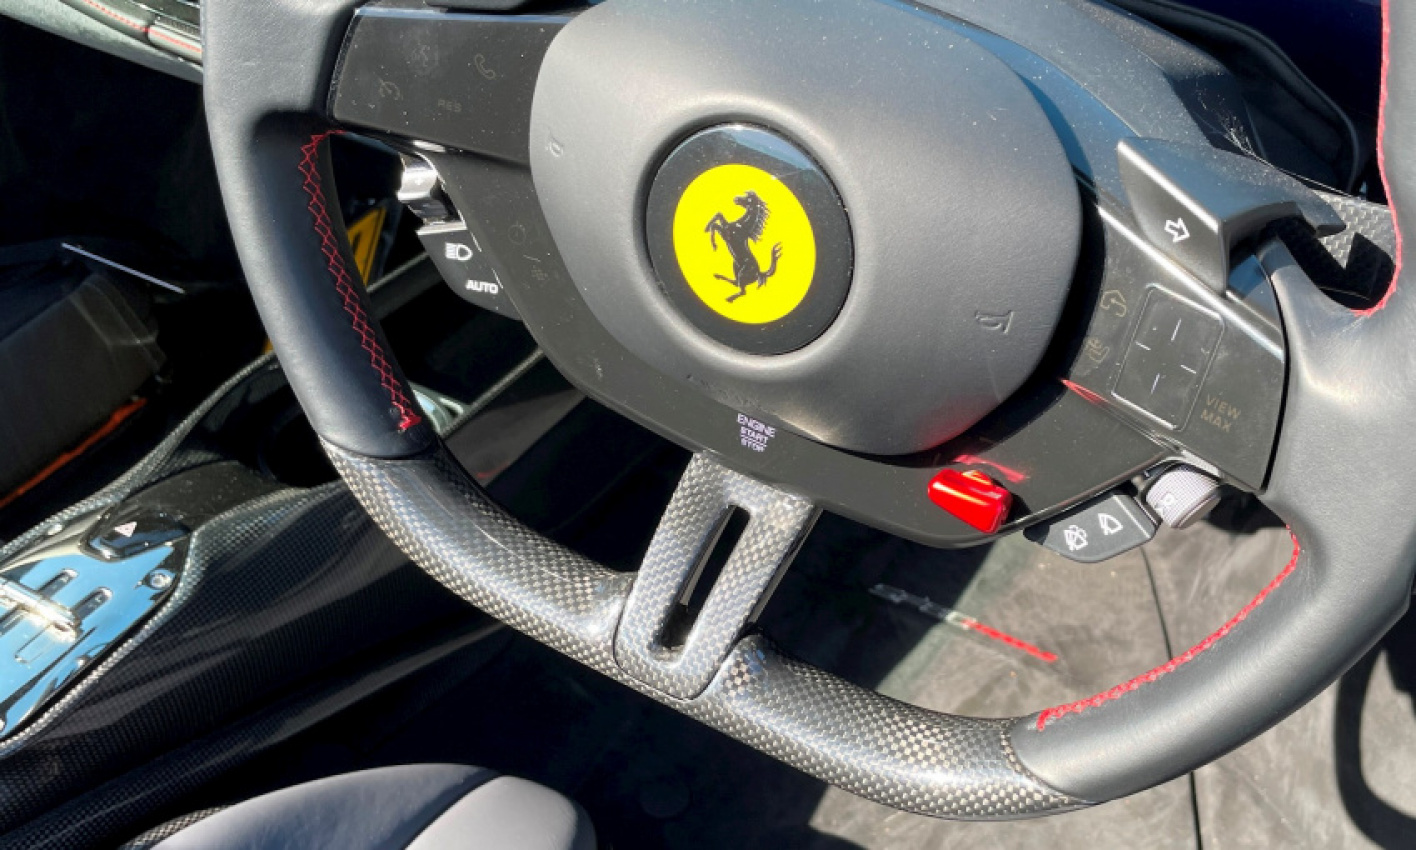 autos, cars, ferrari, reviews, automotive industry, car, cars, driven, driven nz, electric cars, ferrari sf90 spider review: space race, motoring, national, new zealand, news, nz, road tests, ferrari sf90 spider review: space race